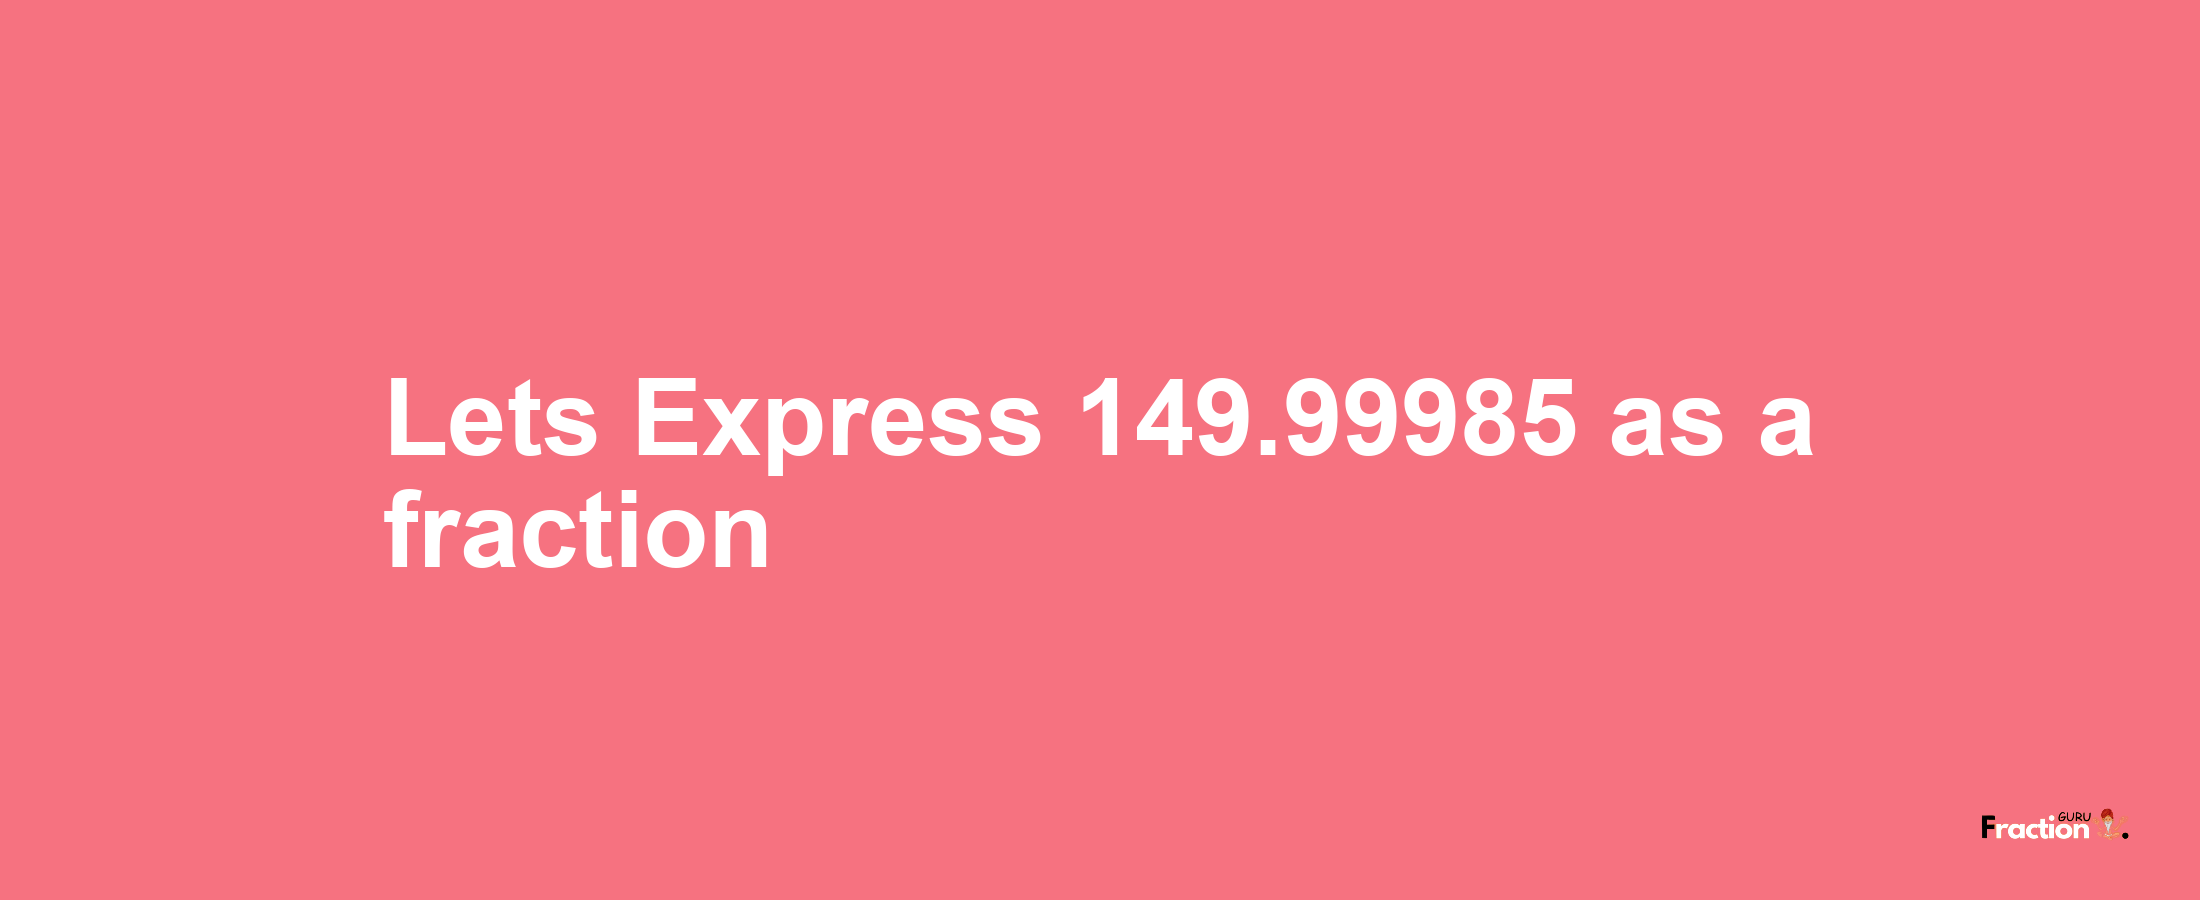 Lets Express 149.99985 as afraction